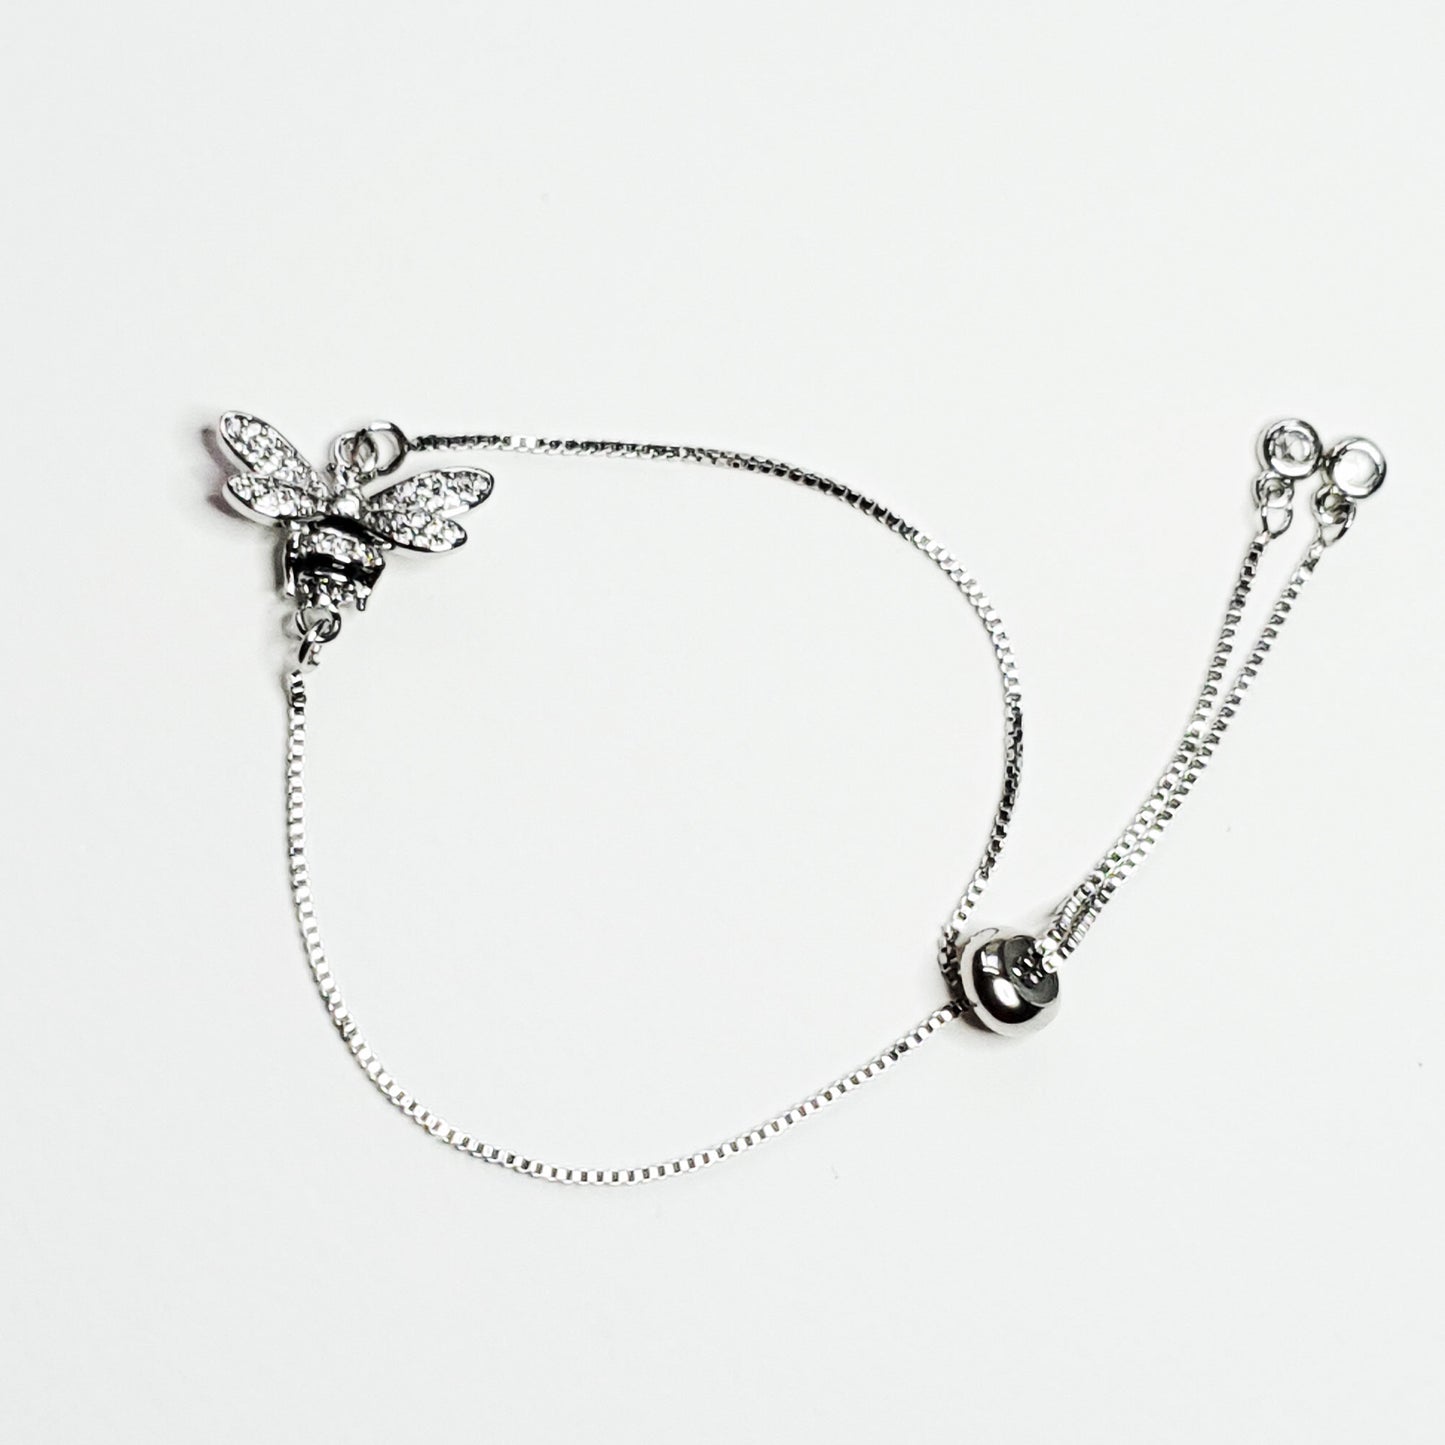 Silver plated bee charm set on a plated chain with an adjustable slider clasp